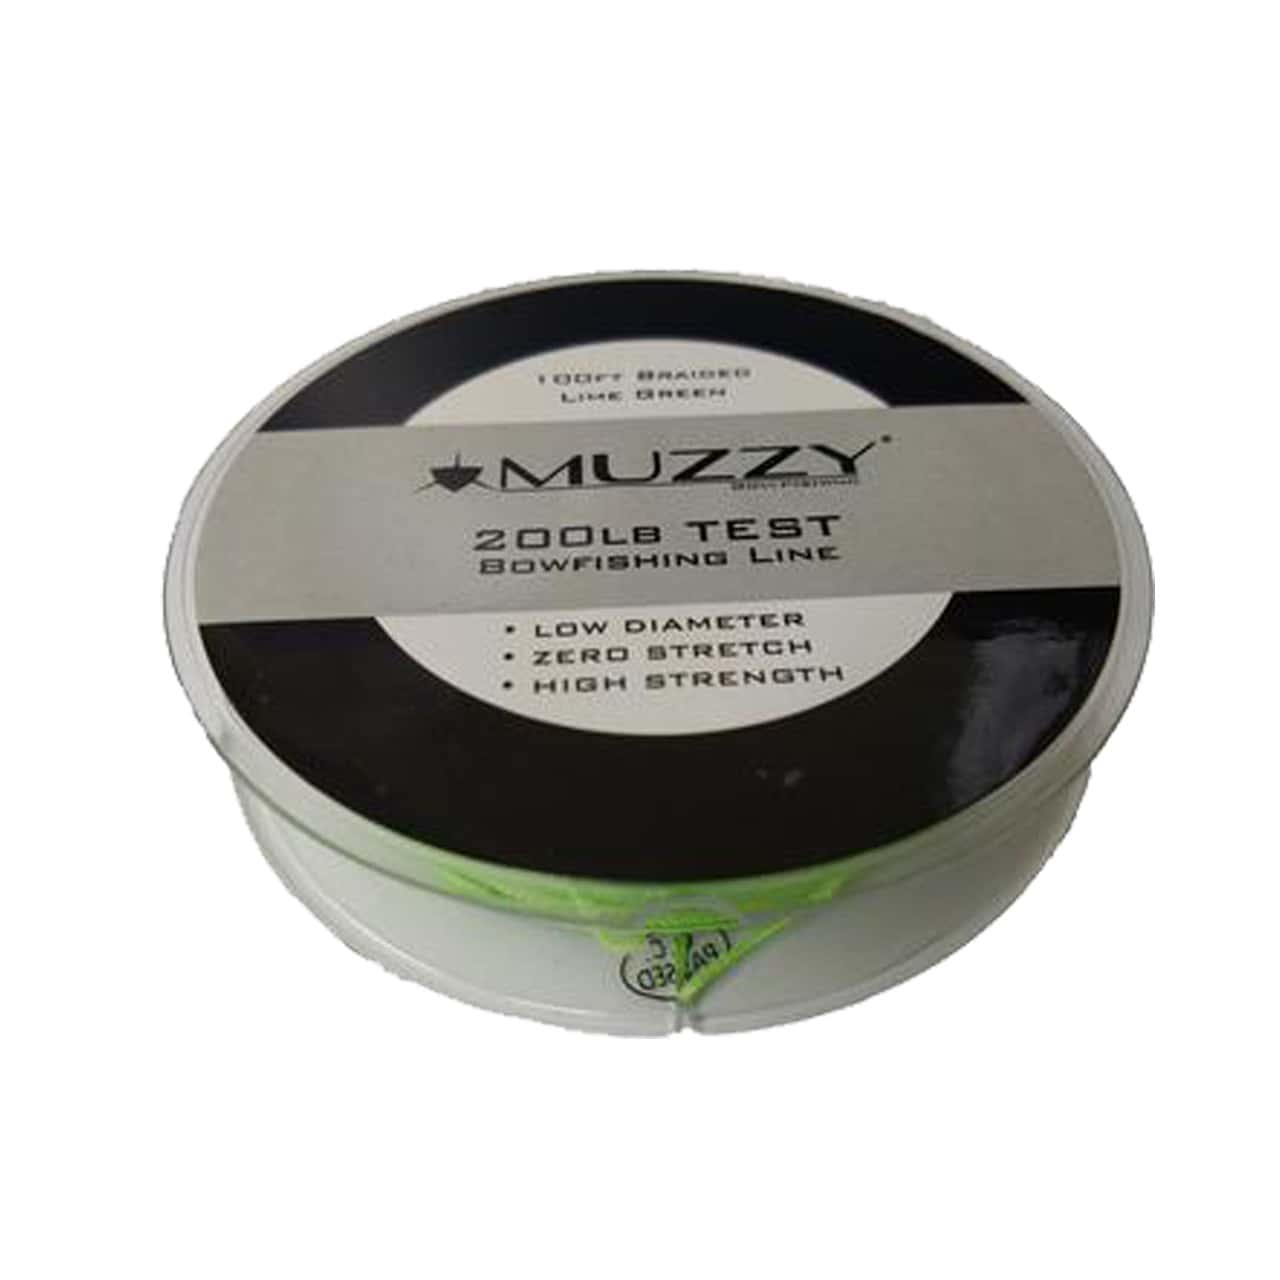  Muzzy 1078 Bow Fishing Line Lime Green 200 Braided 100' Spool  : Sports & Outdoors